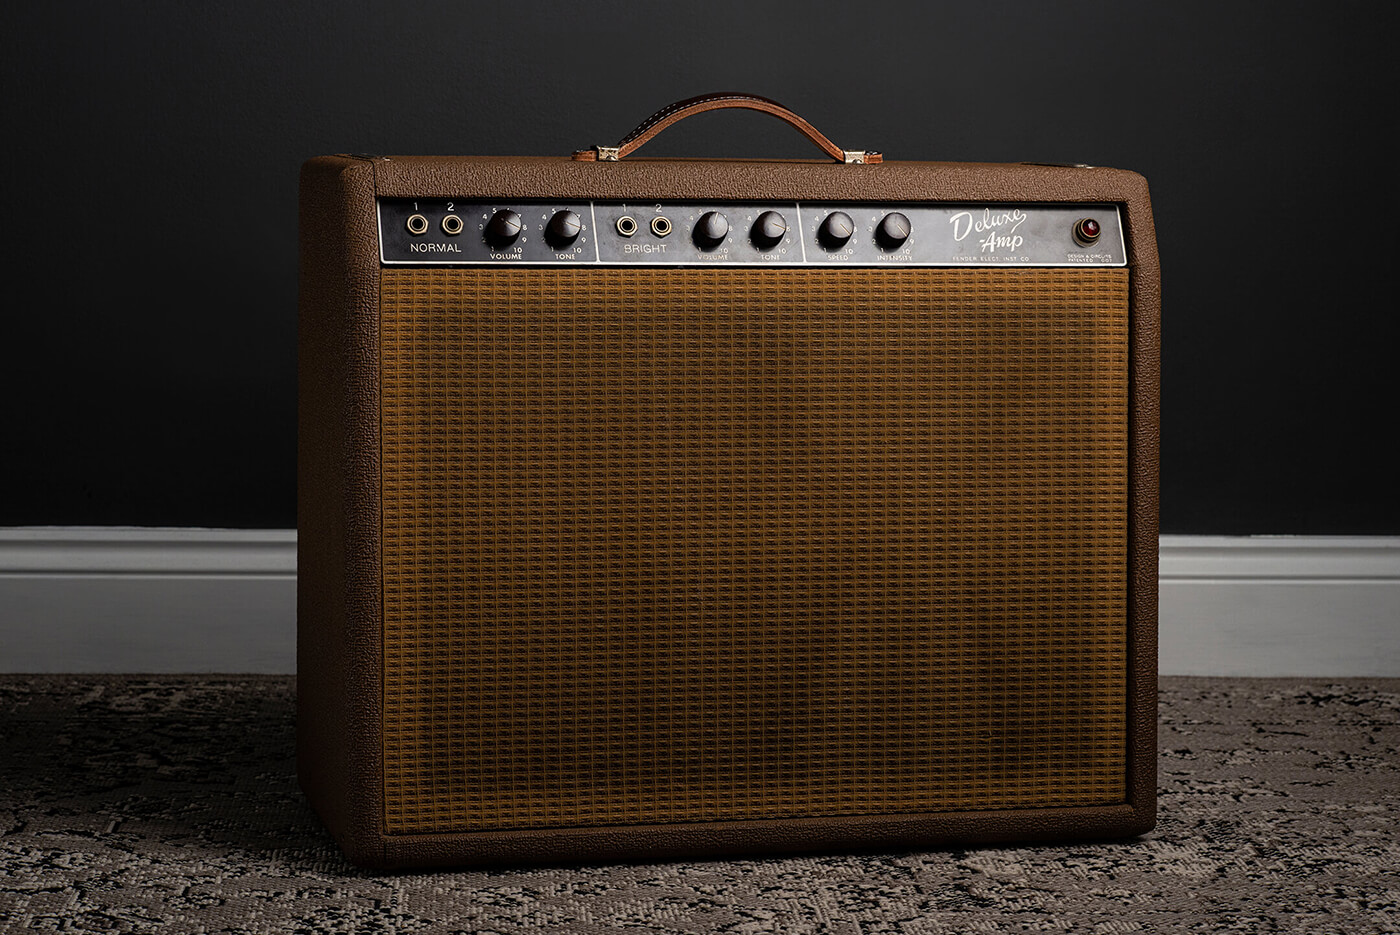 Fender Deluxe from the 1960s